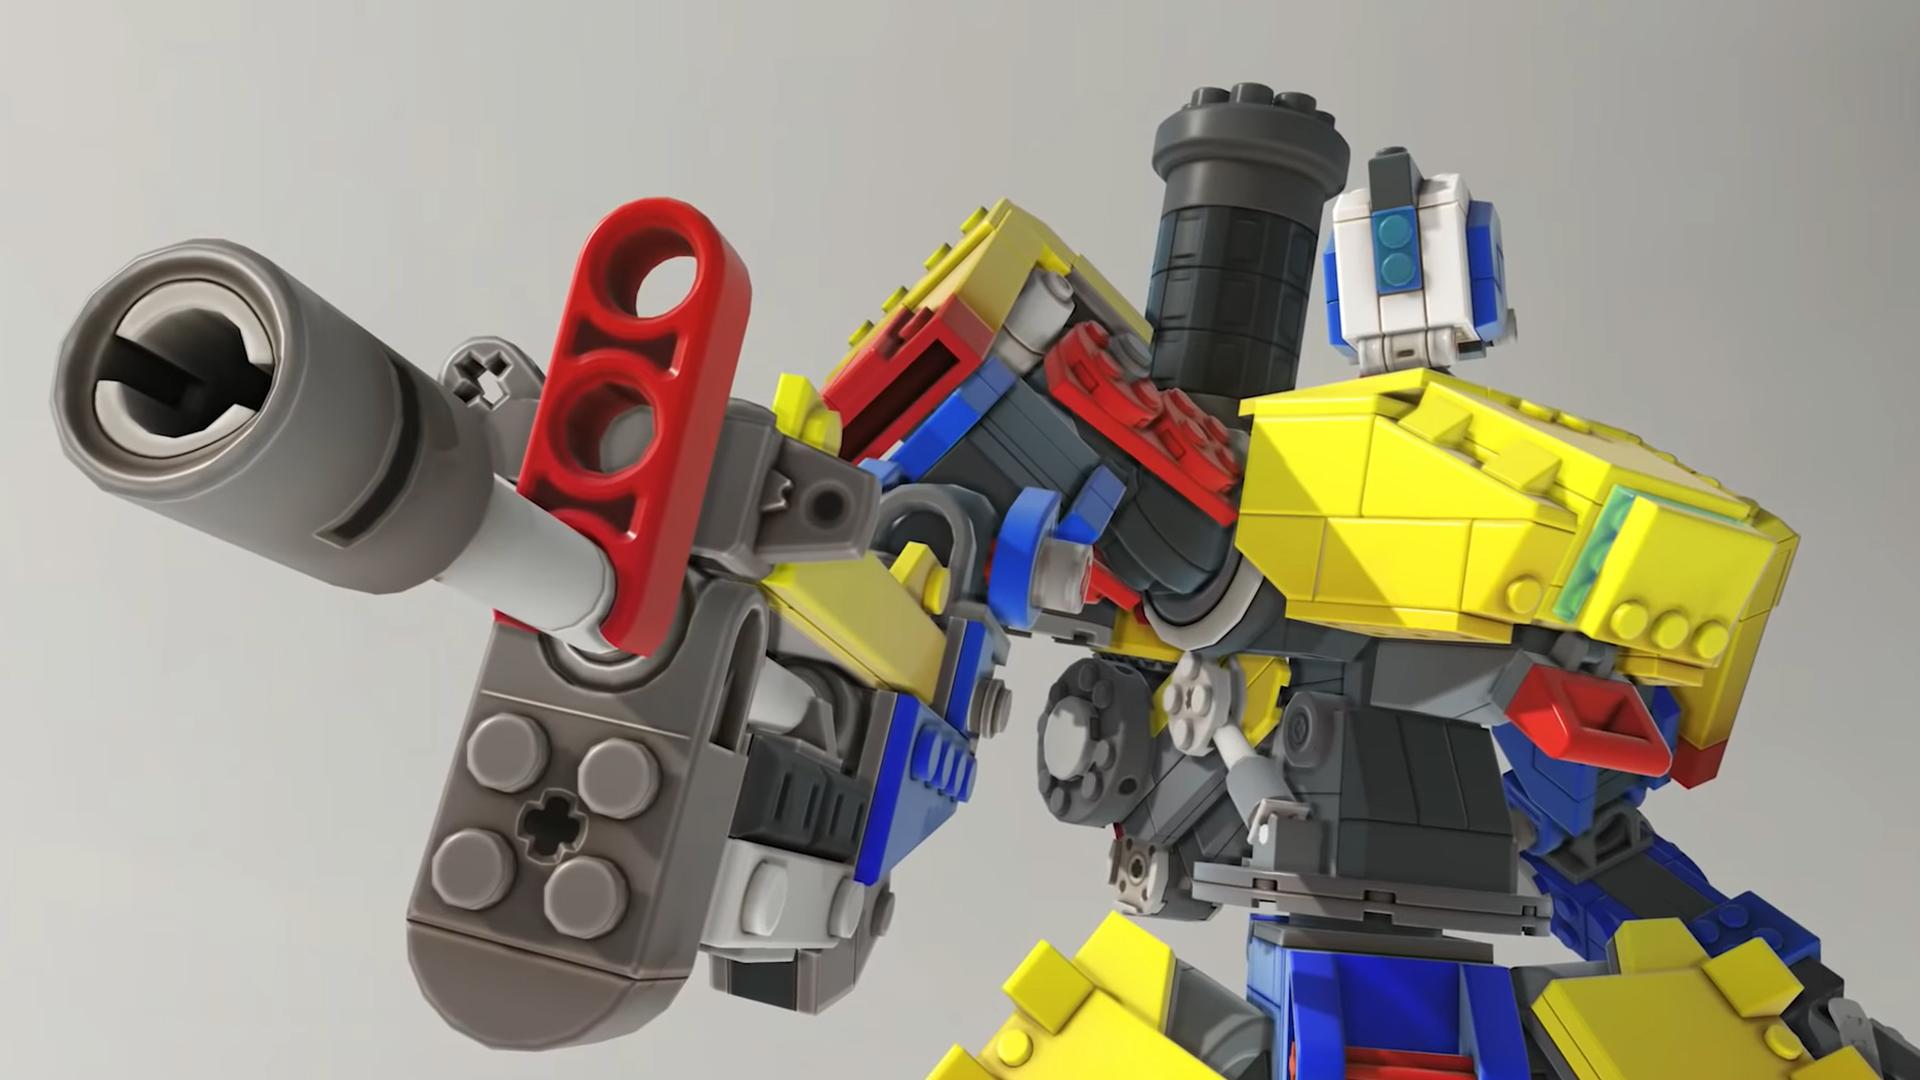 Overwatch’s Lego Bastion skin even has Lego sound effects